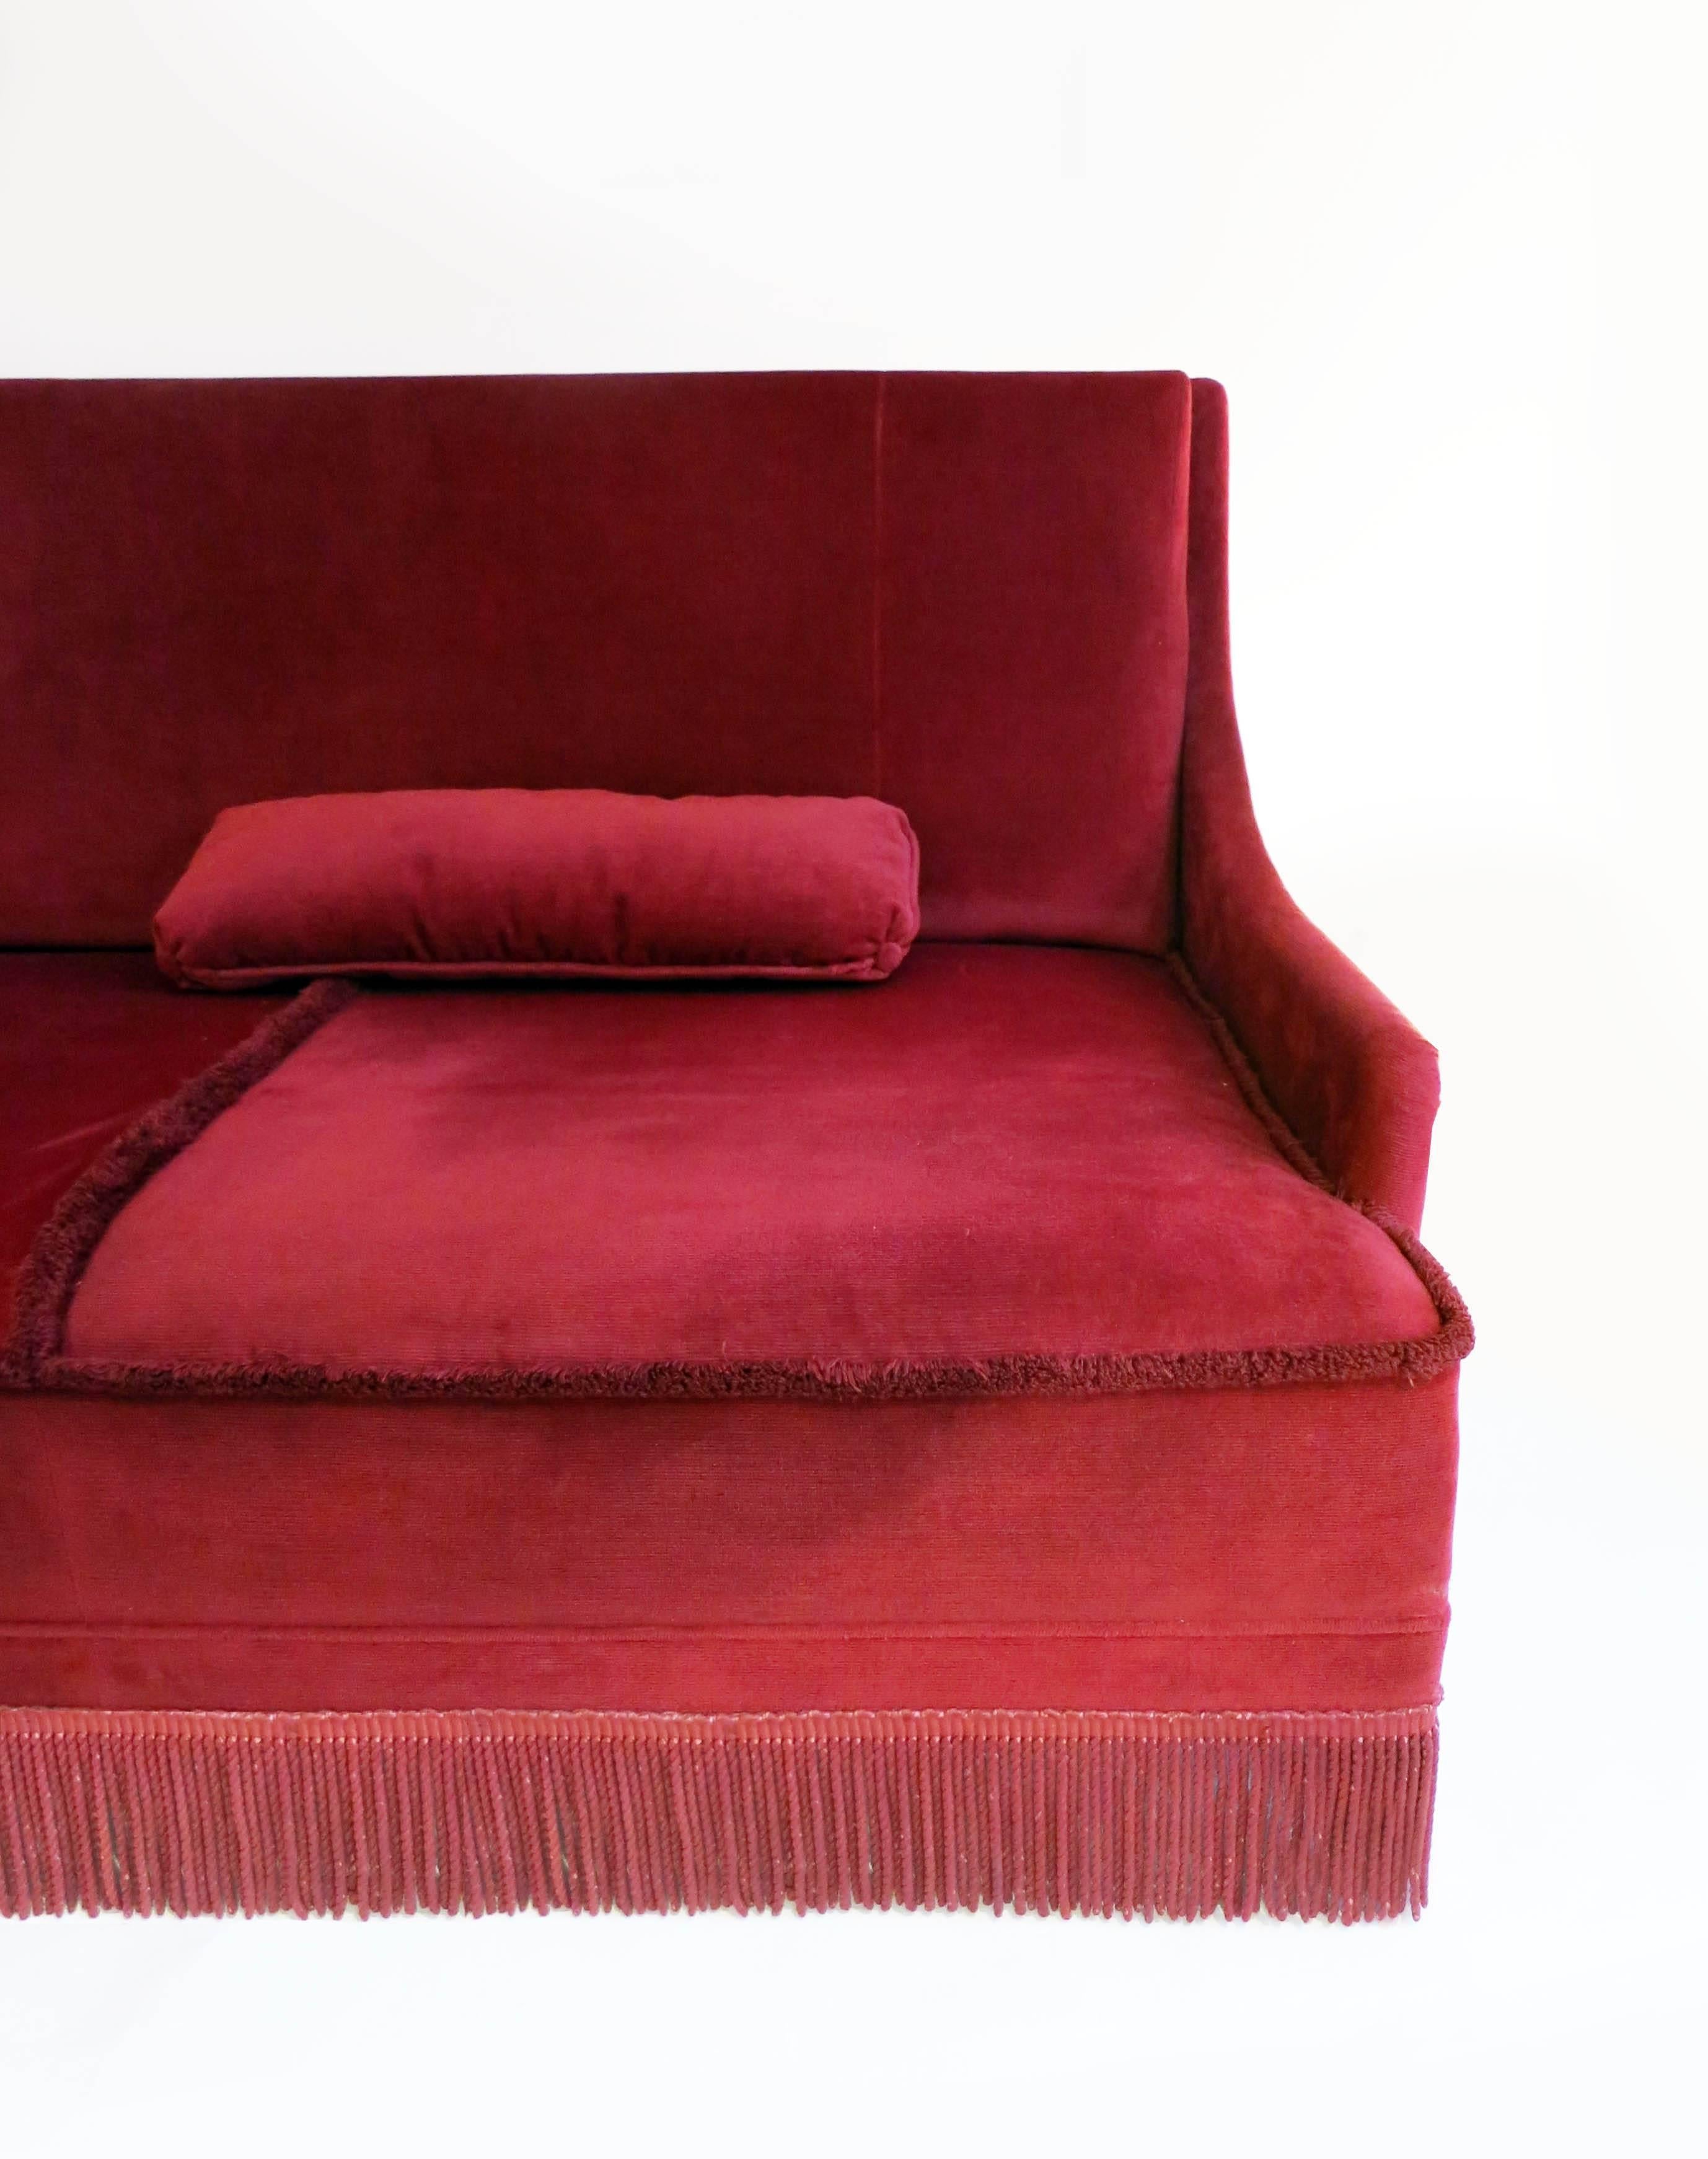 Huge sofa by Andre Arbus made on order for a private house, south of France.
Upholstery in perfect condition with the original red velvet.